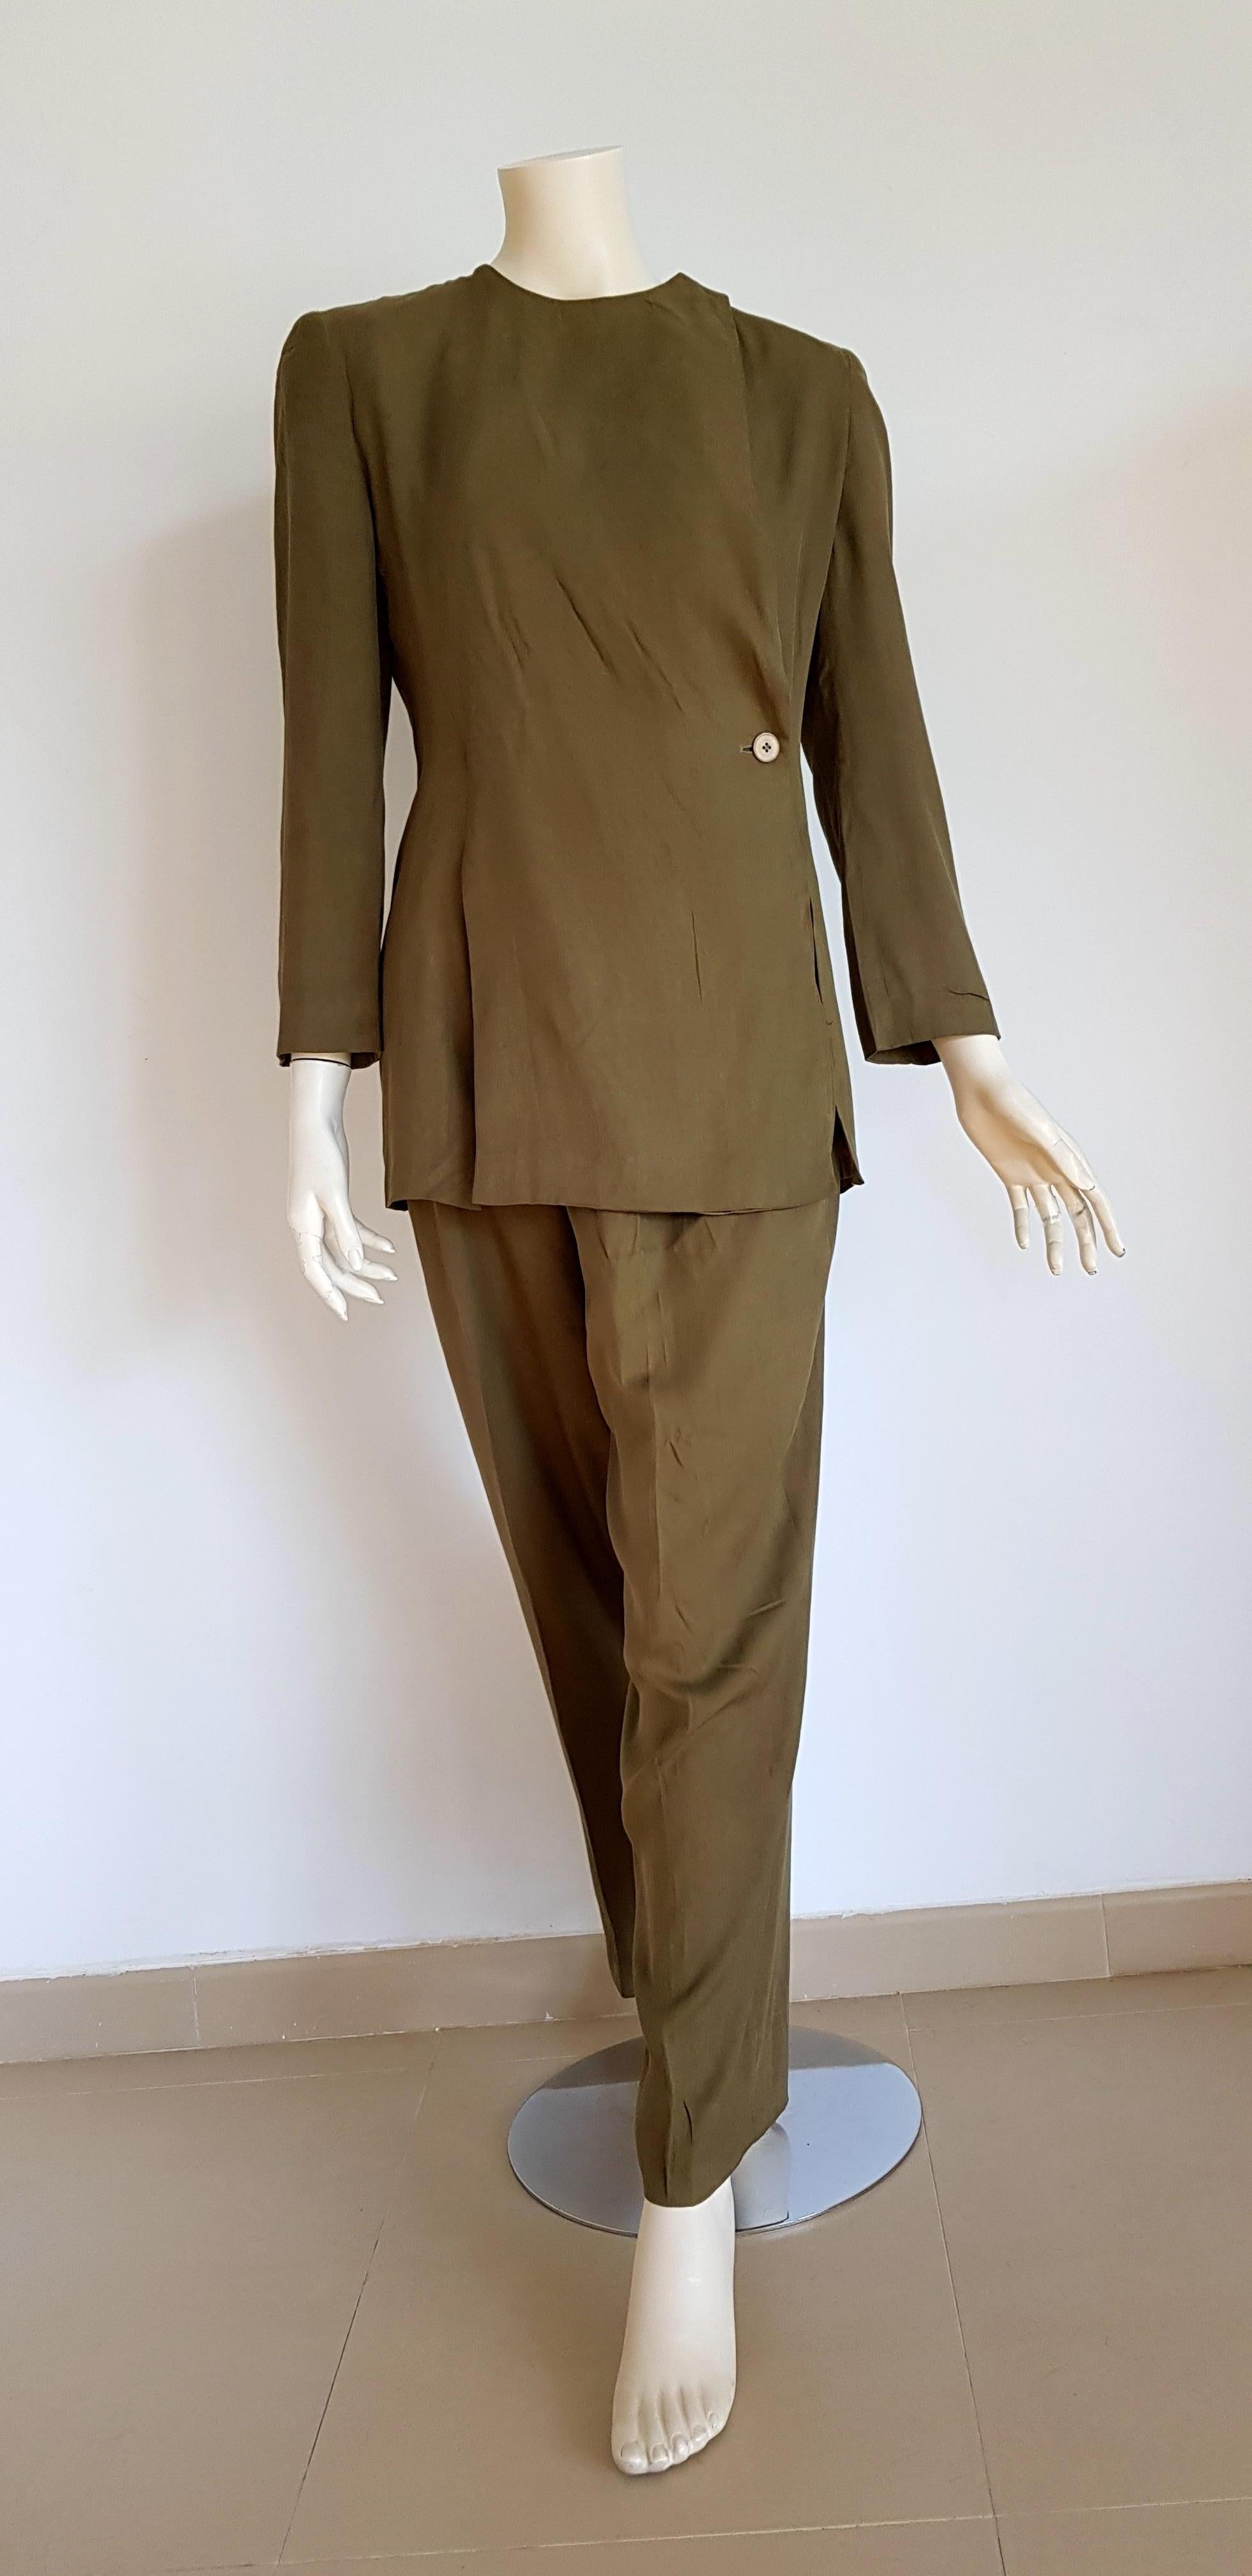 Giorgio ARMANI green silk with 1 button closed collar, trousers suit  - Unworn, New

SIZE: equivalent to about Small / Medium, please review approx measurements as follows in cm. 
JACKET: lenght 75, chest underarm to underarm 50, bust circumference